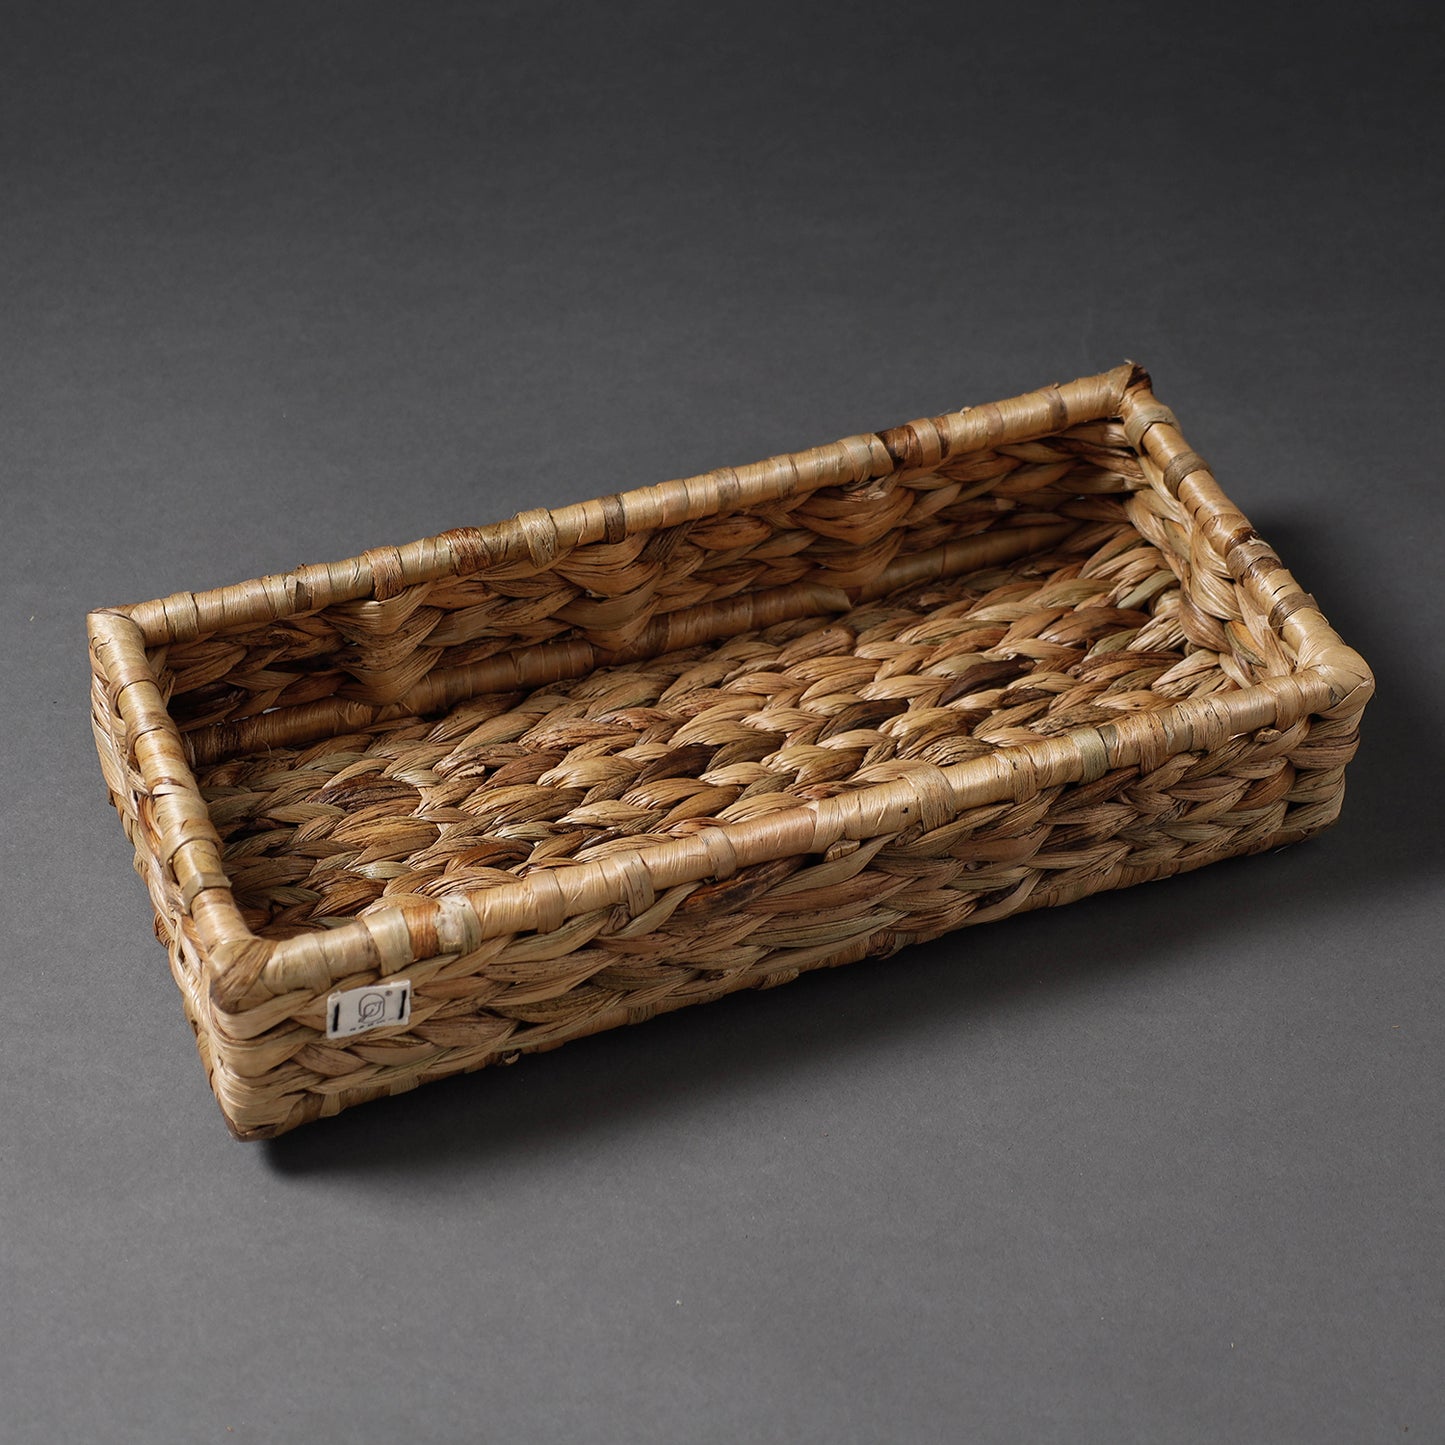 Handcrafted Organic Water Hyacinth Rectangular Tray (14 x 7 in)